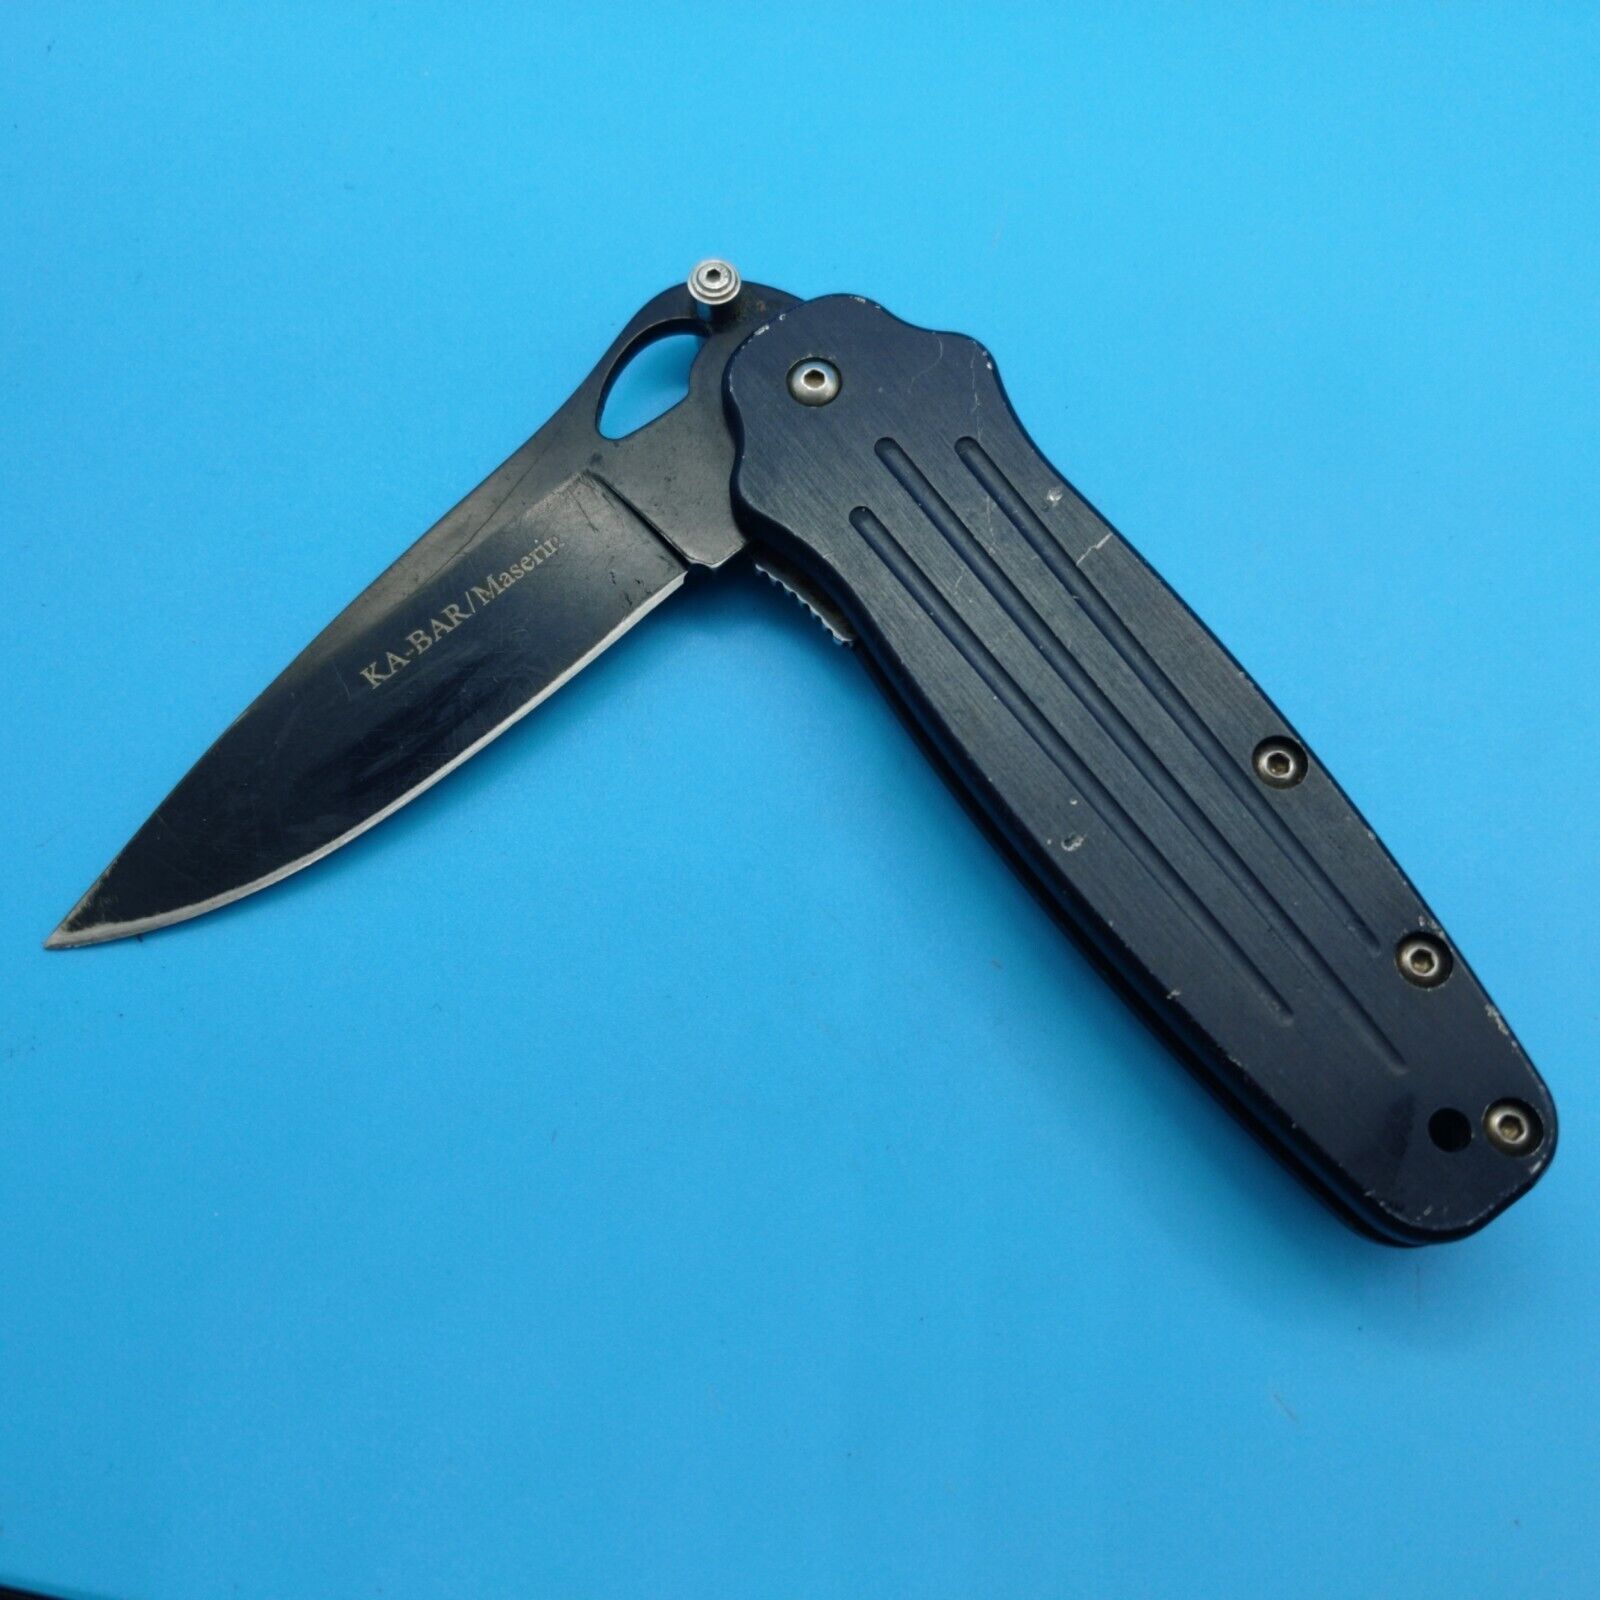 USED Maserin folding Knife Guadalup Model 231-T Made in Italy by ka-bar tactical